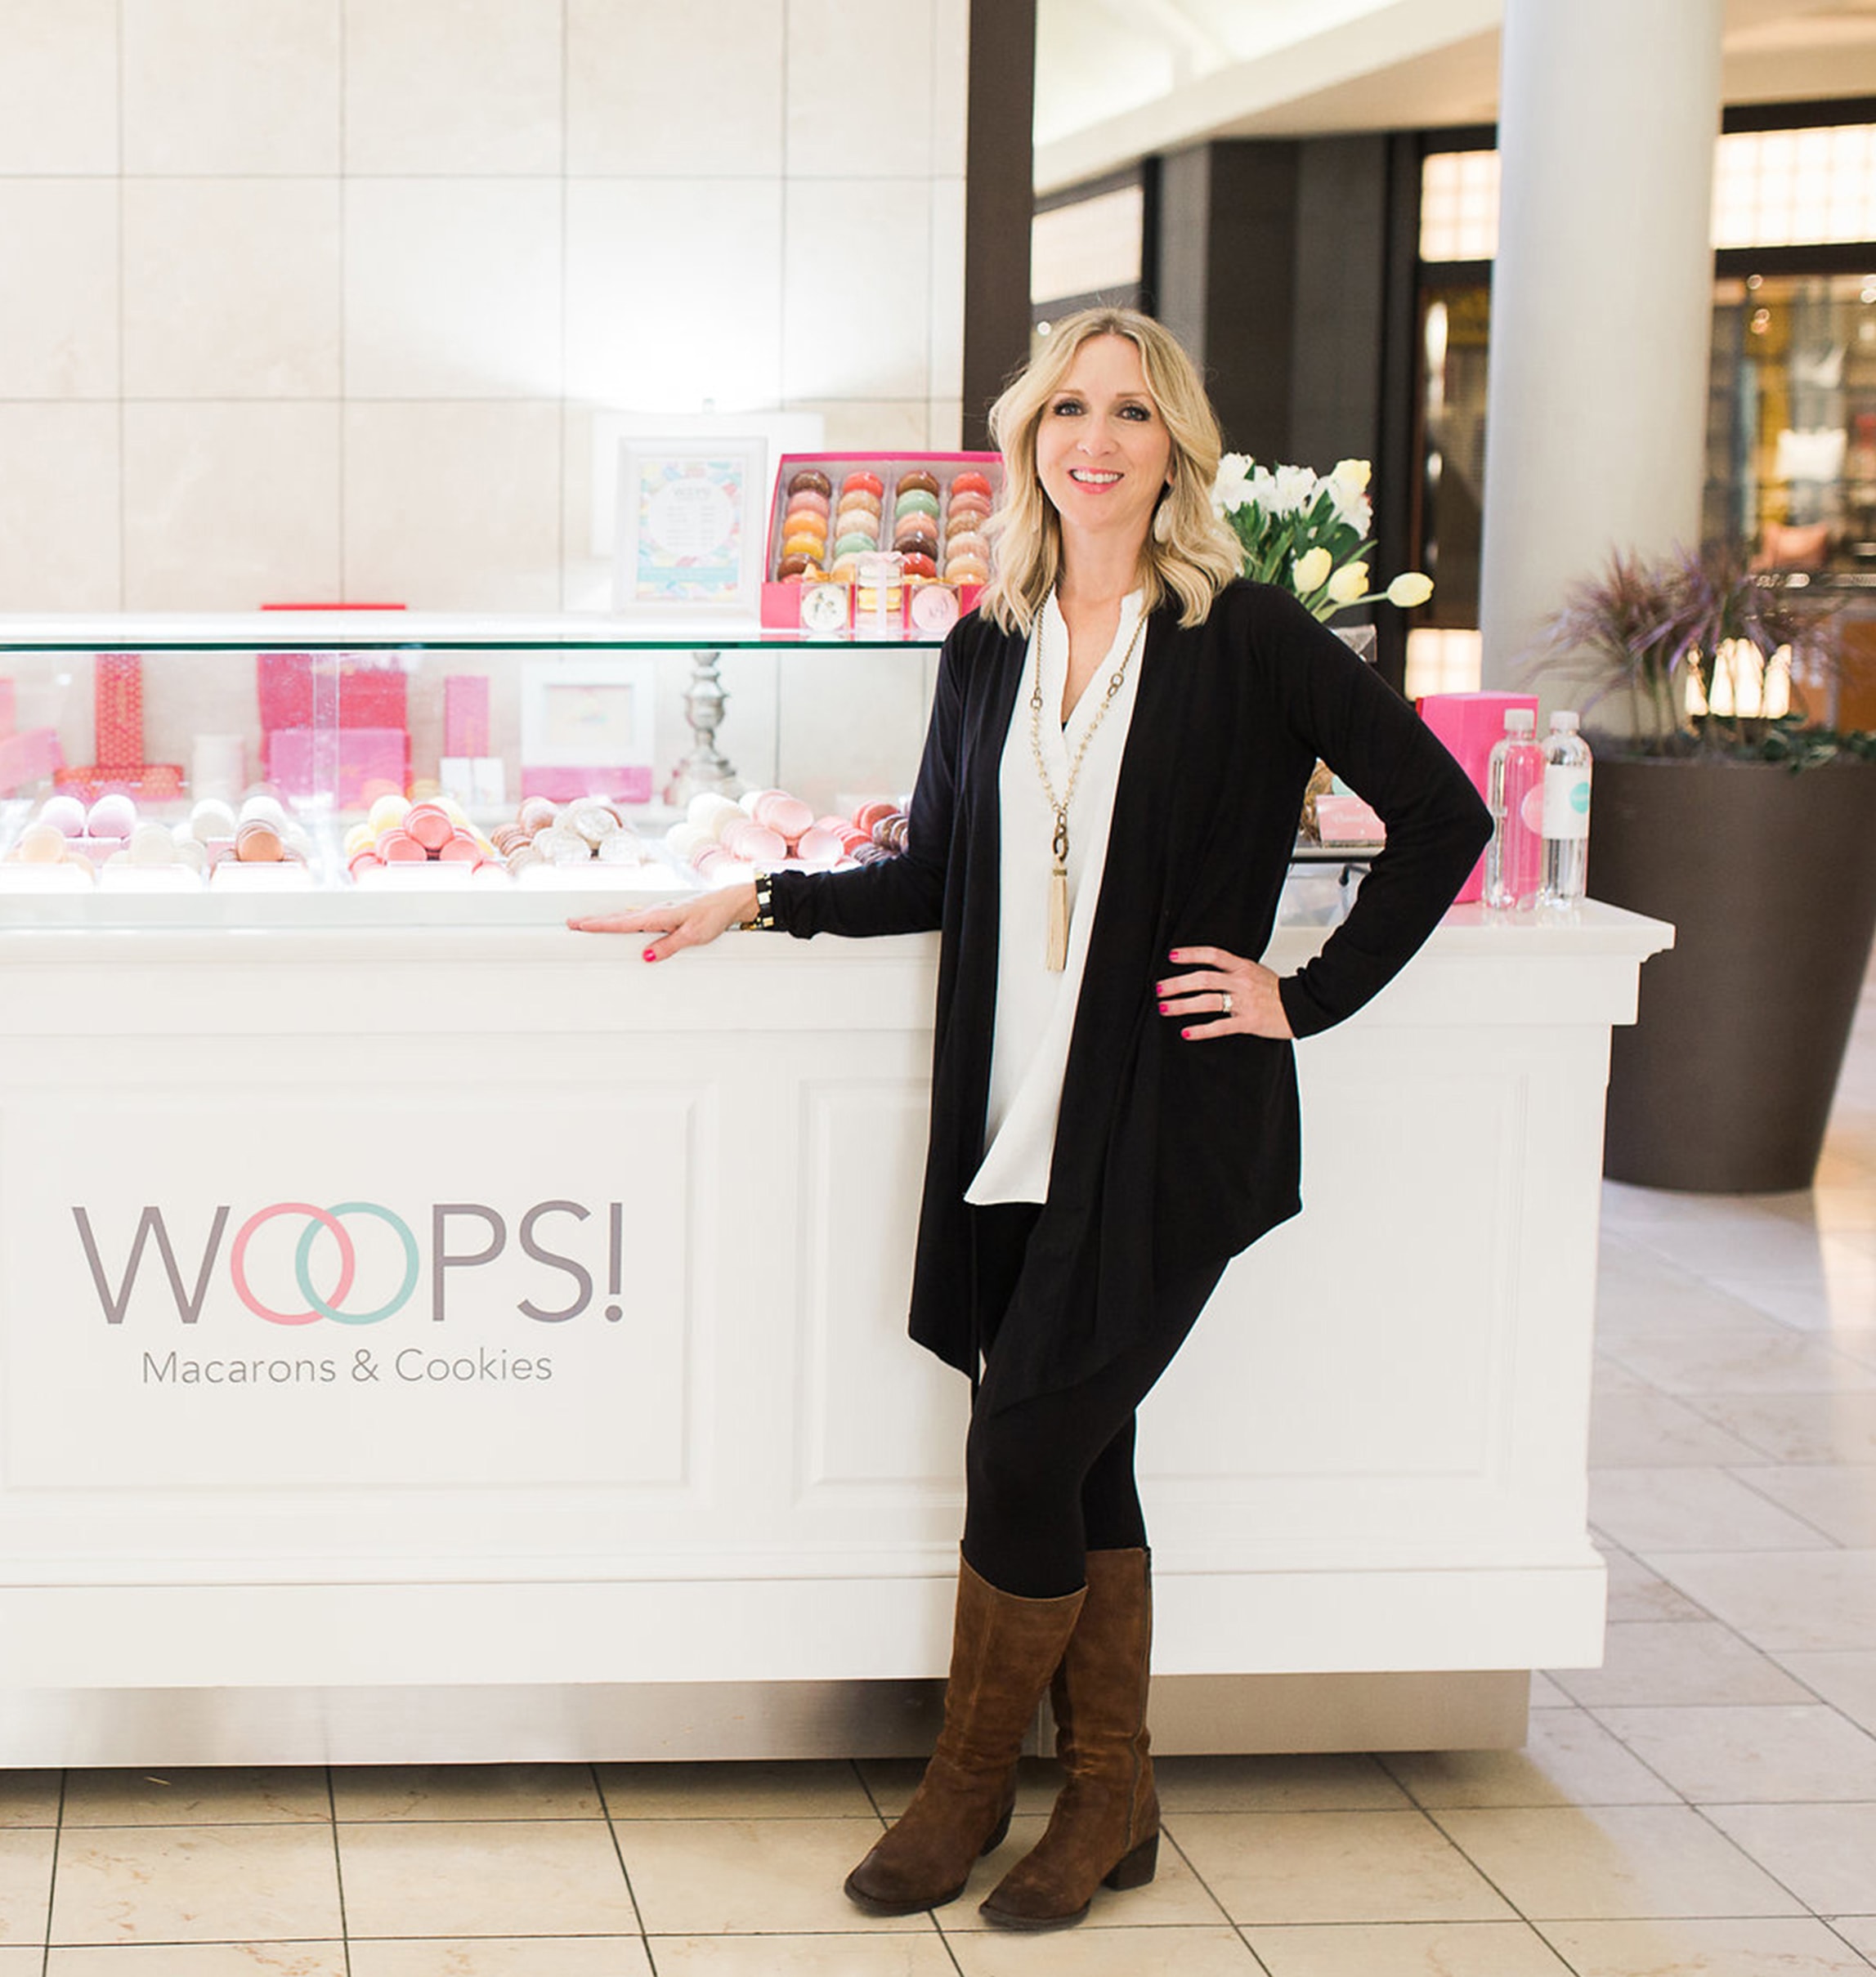 Owner of Woops! French Macaron Franchisee with the macaron counter and some flowers at the back